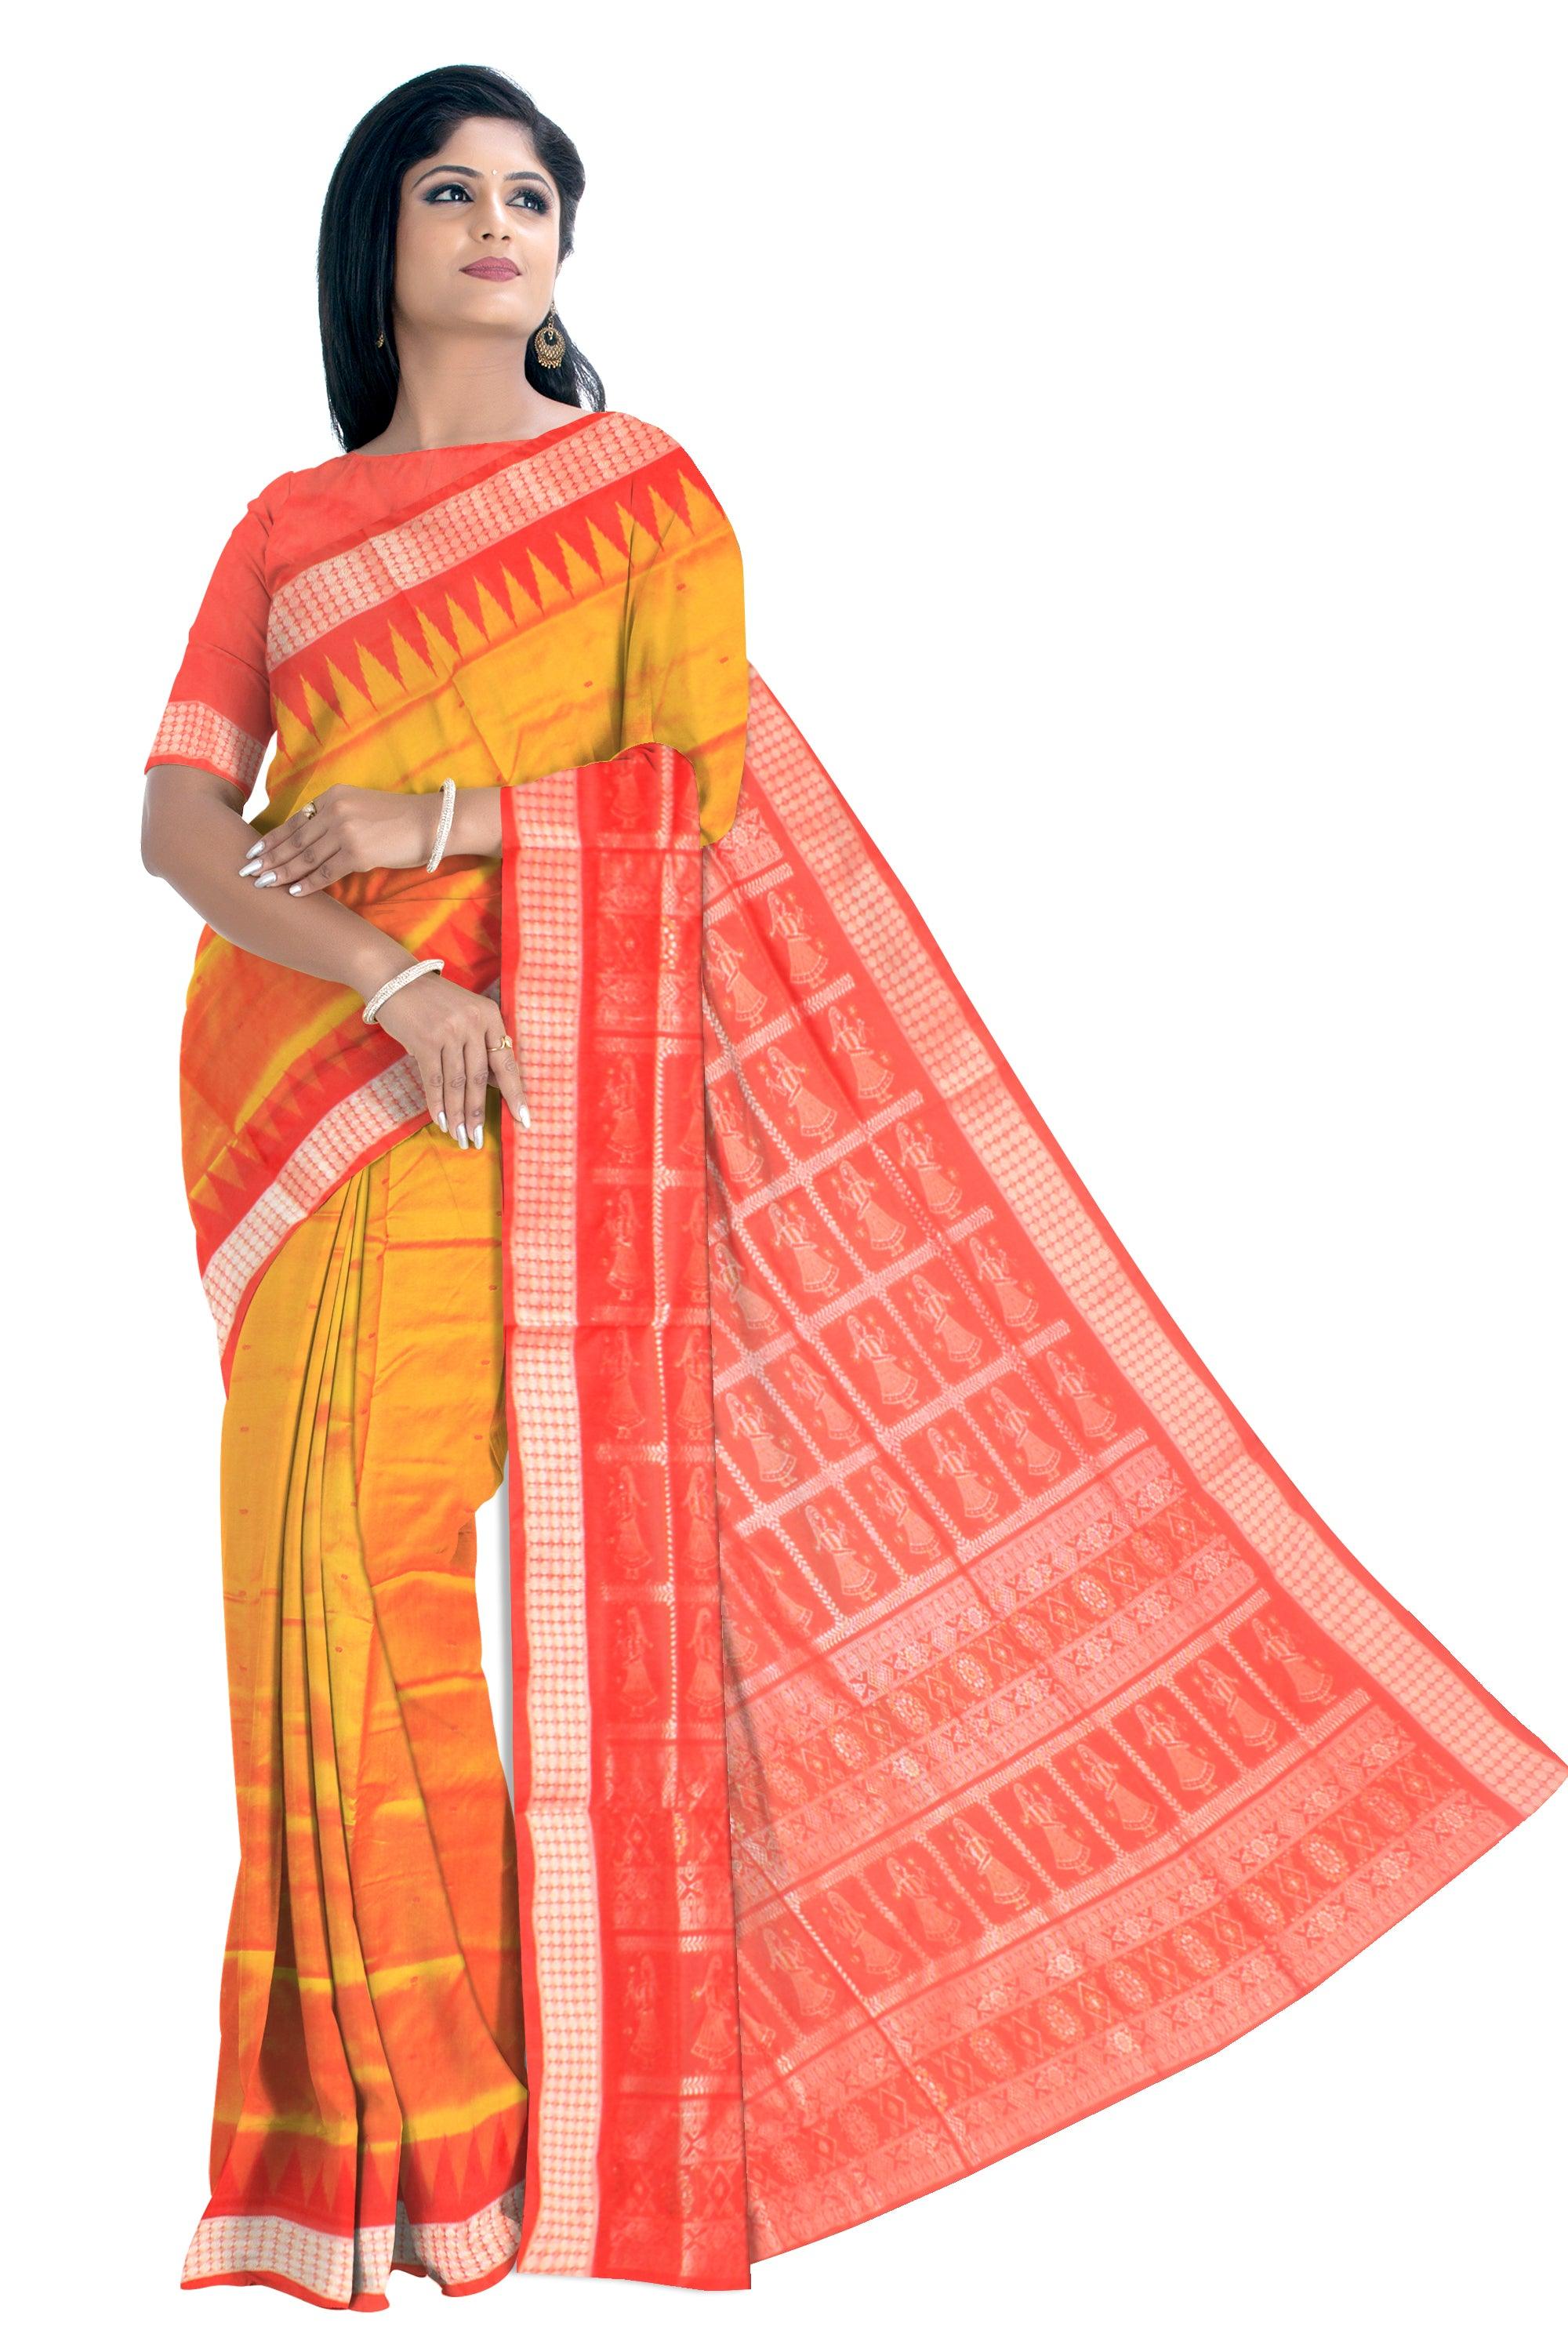 Sambalpuri Pata Saree in Yellow  Color in booty design with Silver color Border with blouse piece. - Koshali Arts & Crafts Enterprise